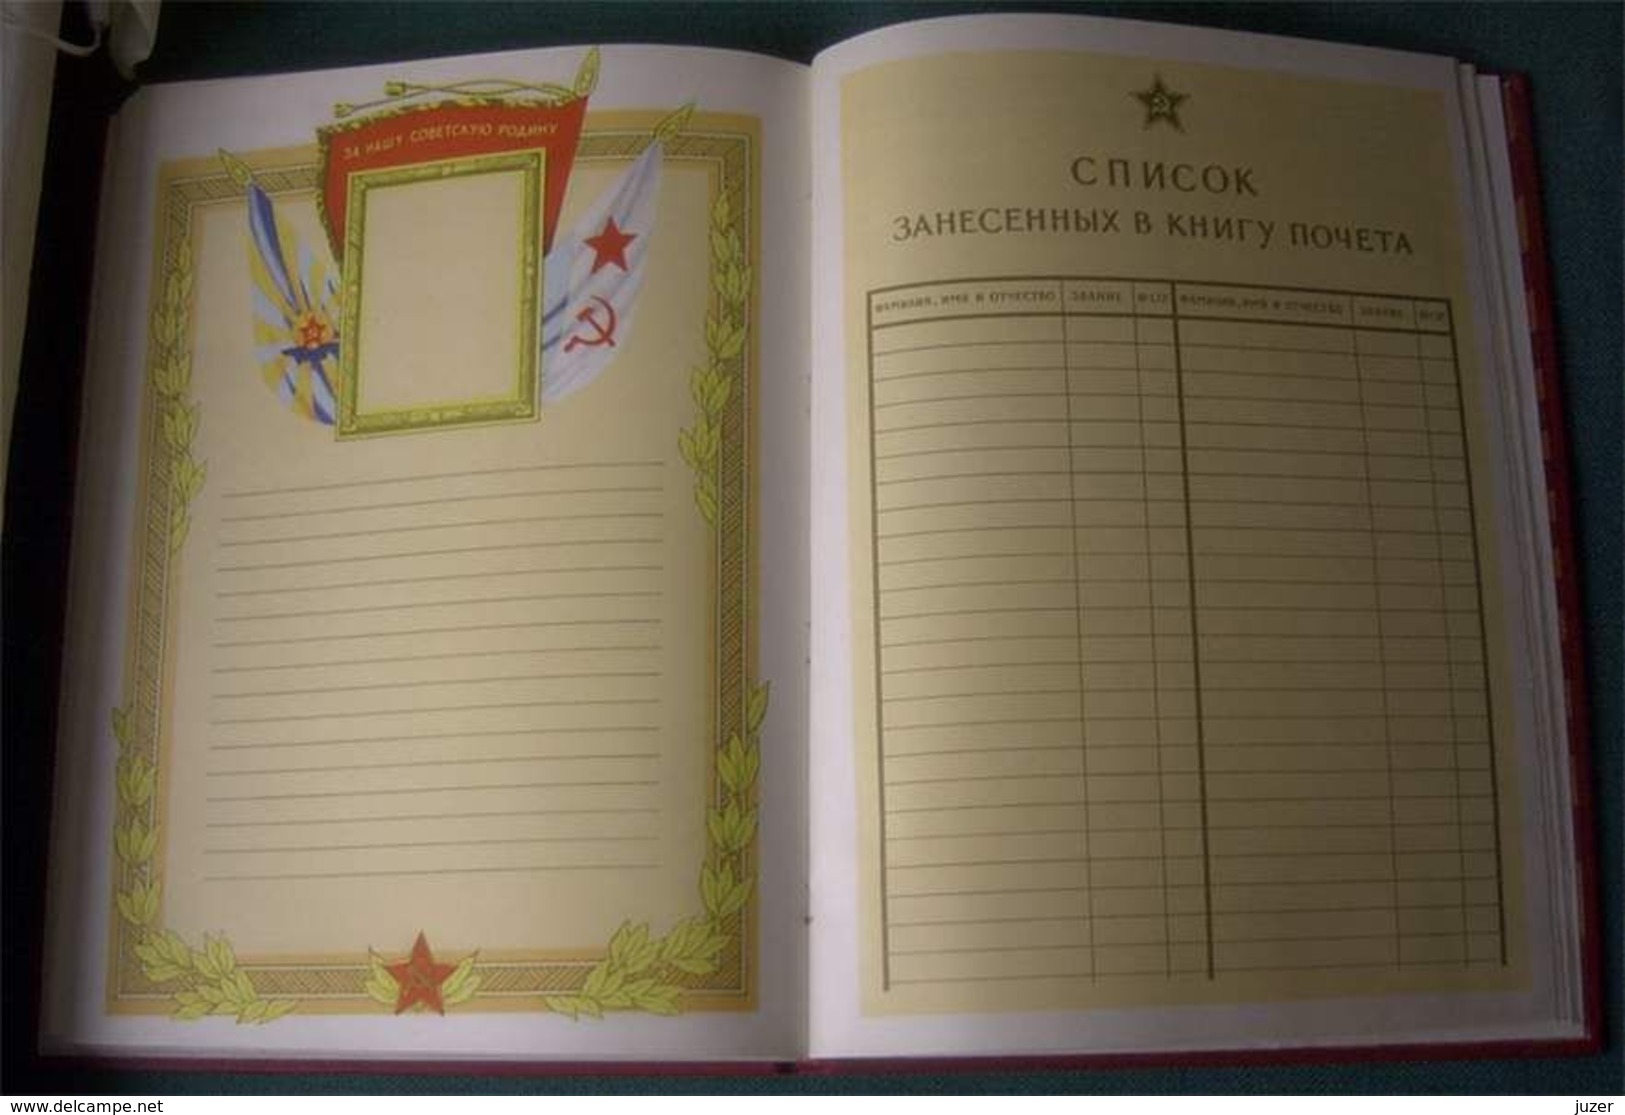 USSR (Russia): Military Book of Honour - NEVER USED